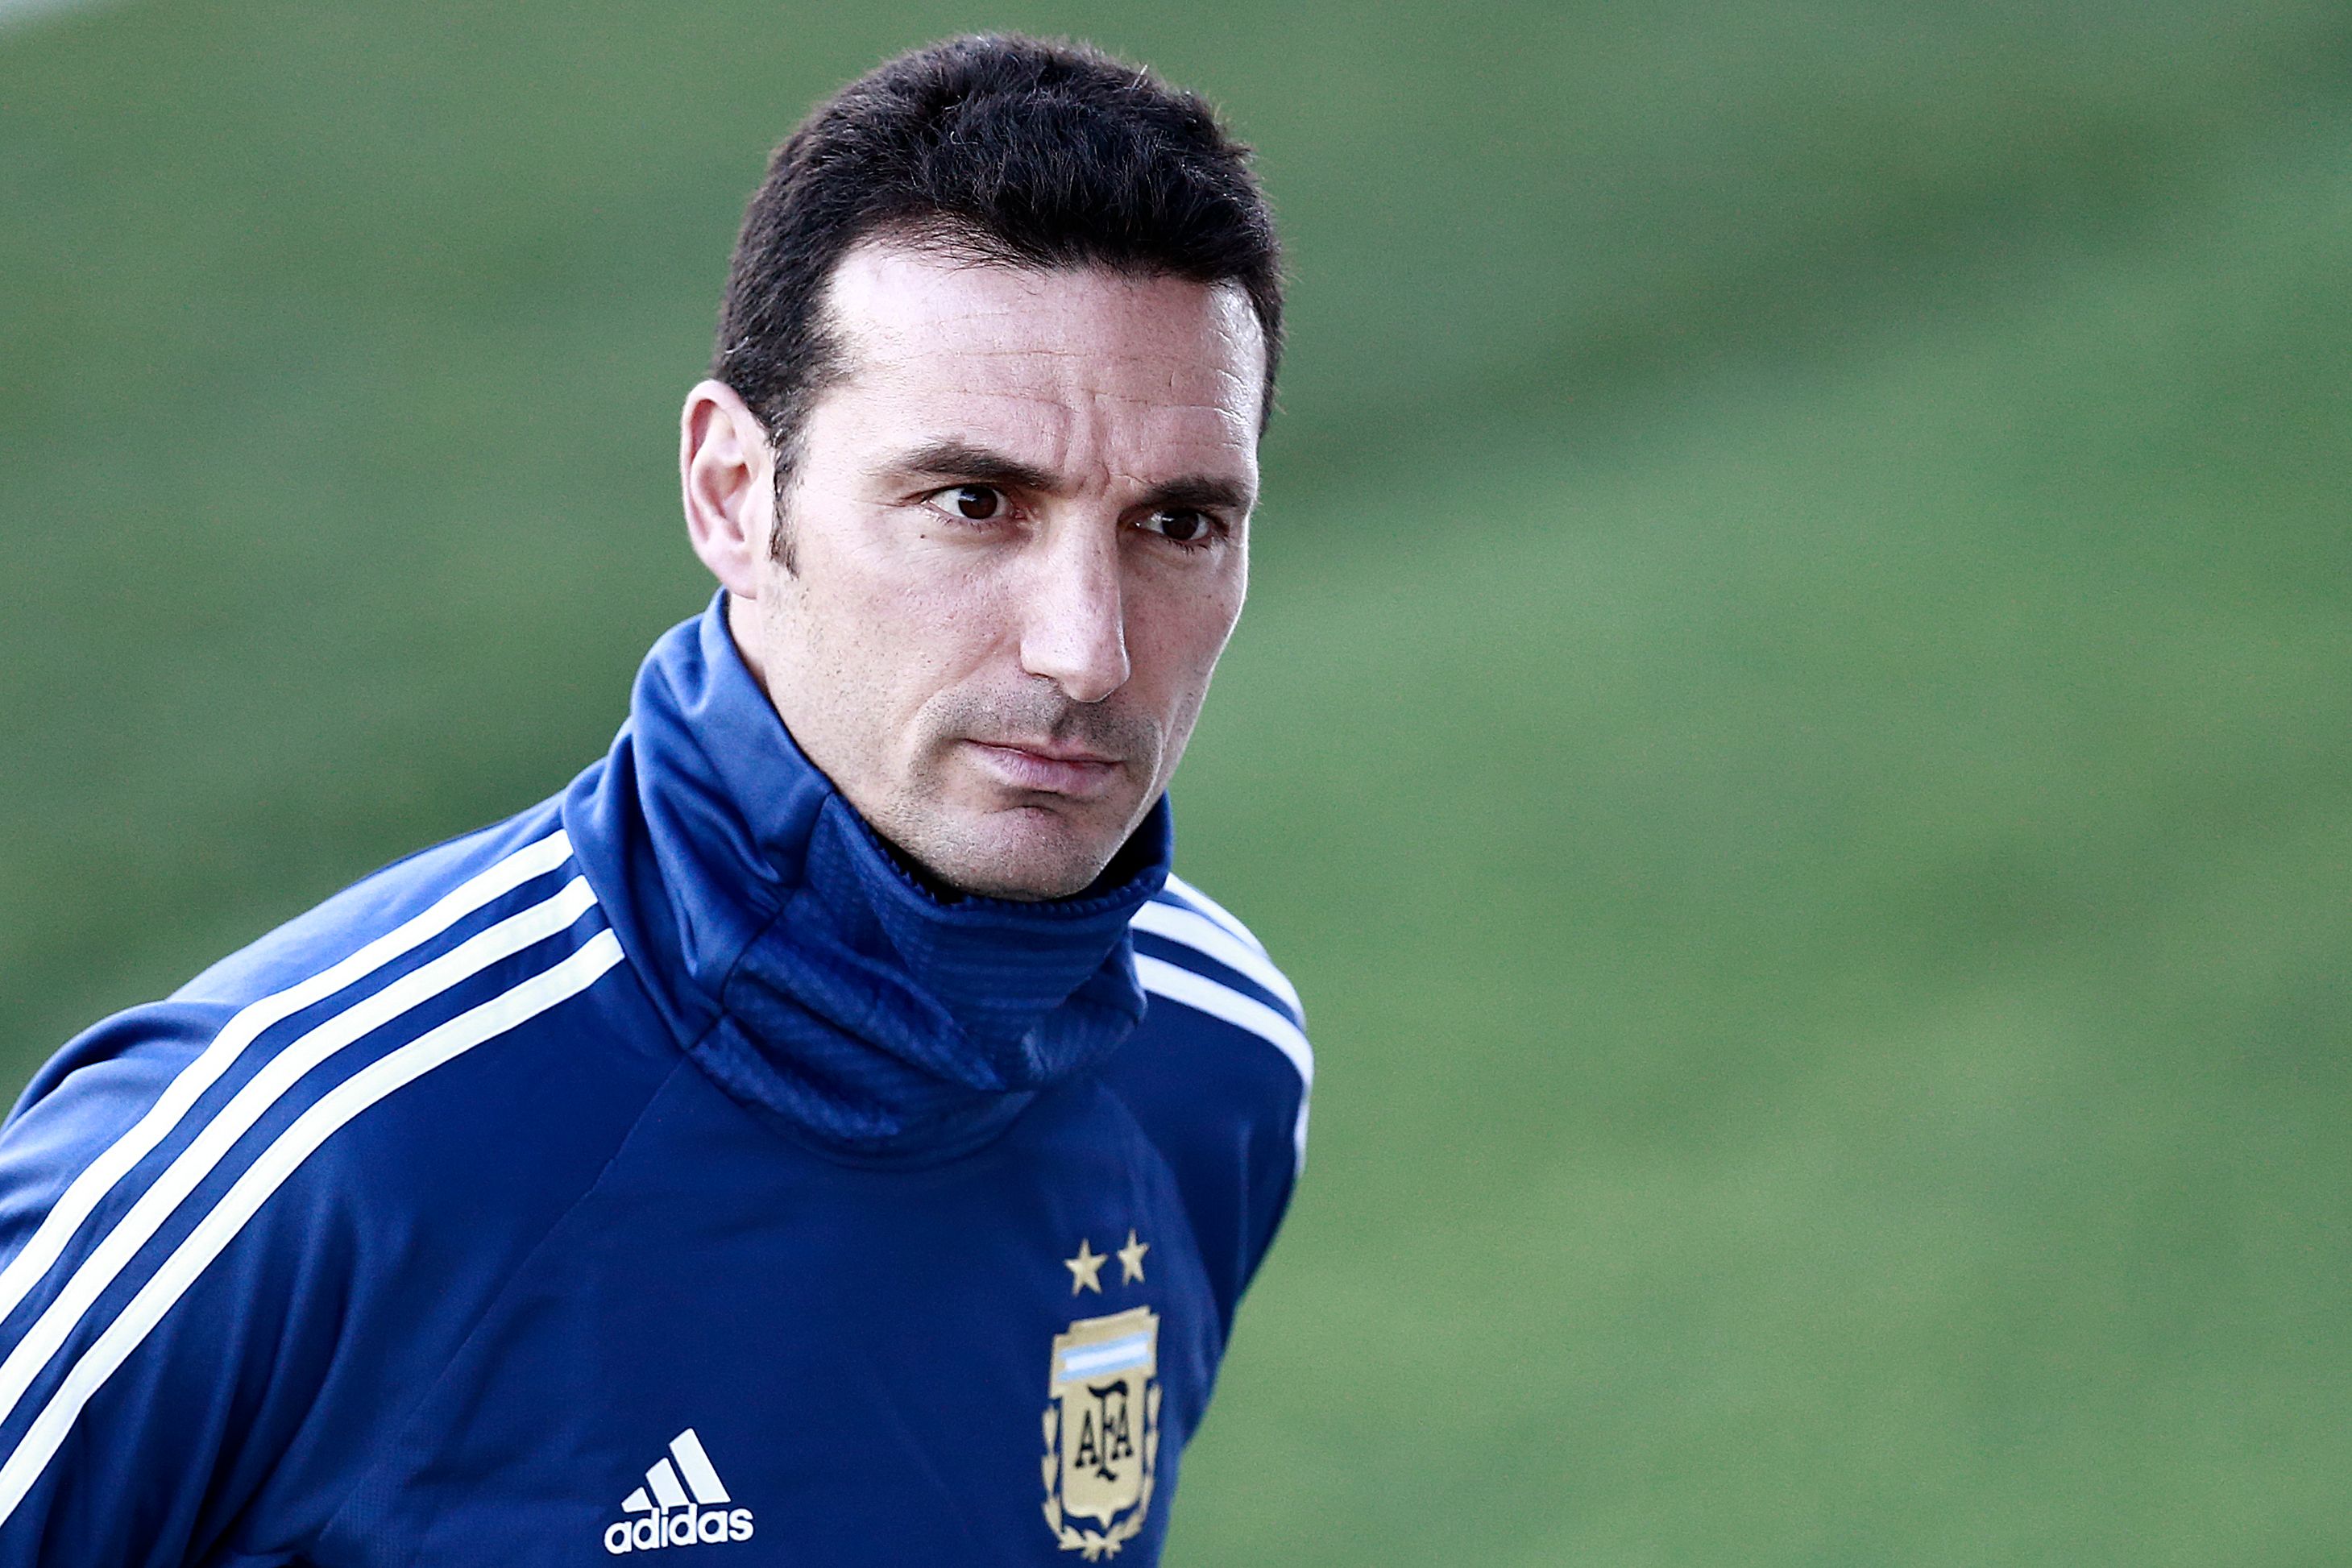 Argentina's coach Lionel Scaloni attends a training session at Real Madrid's training facilities of Valdebebas in Madrid on March 20, 2019, ahead of an international friendly football match between Argentina and Venezuela in preparation for the Copa America to be held in Brazil in June and July 2019. (Photo by BENJAMIN CREMEL / AFP)        (Photo credit should read BENJAMIN CREMEL/AFP/Getty Images)